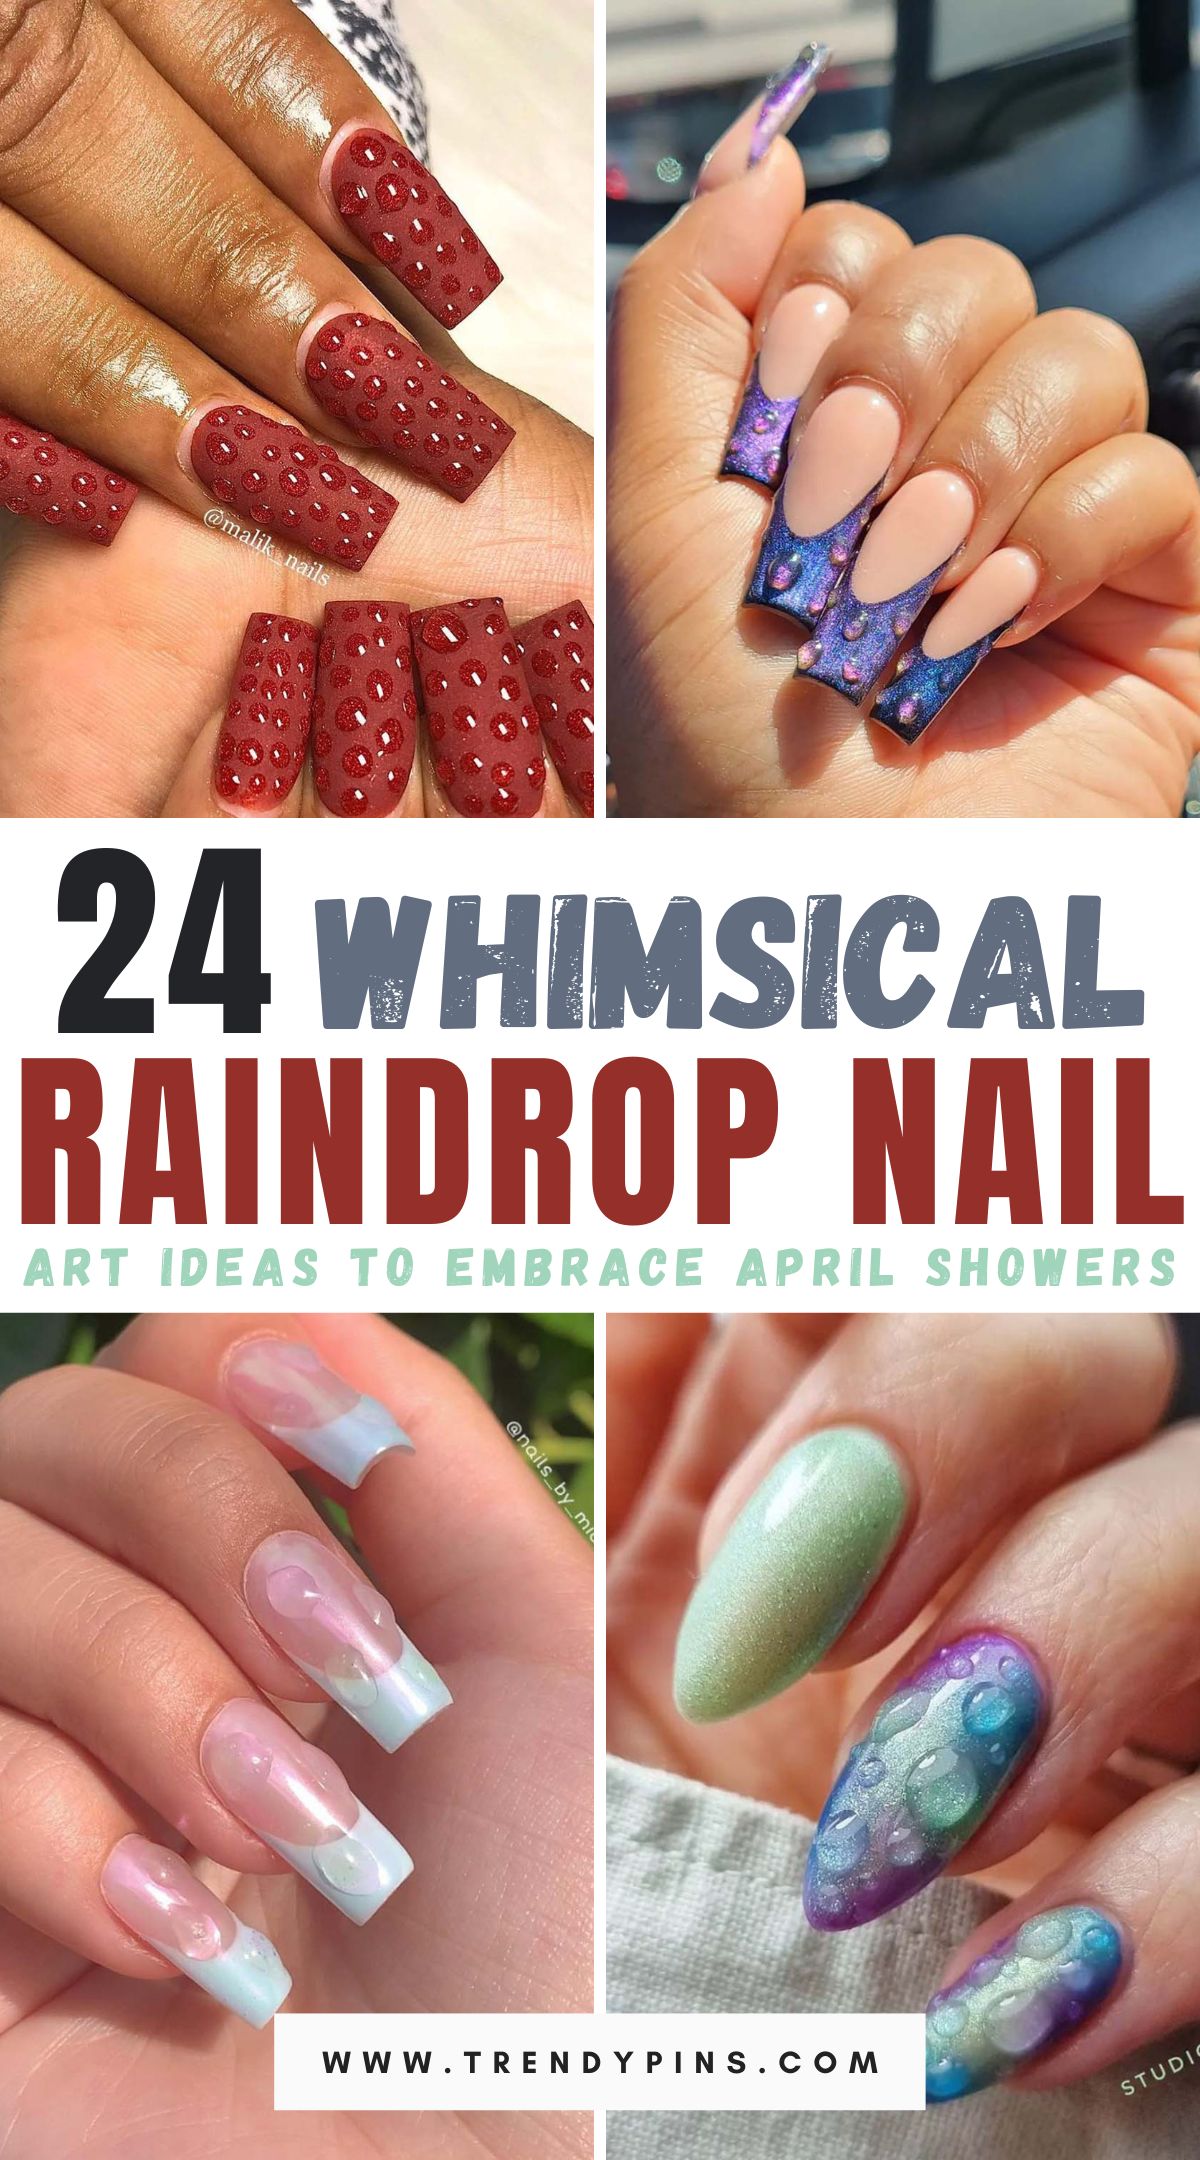 Discover 24 playful and creative raindrop nail designs perfect for embracing April's rainy days in style.